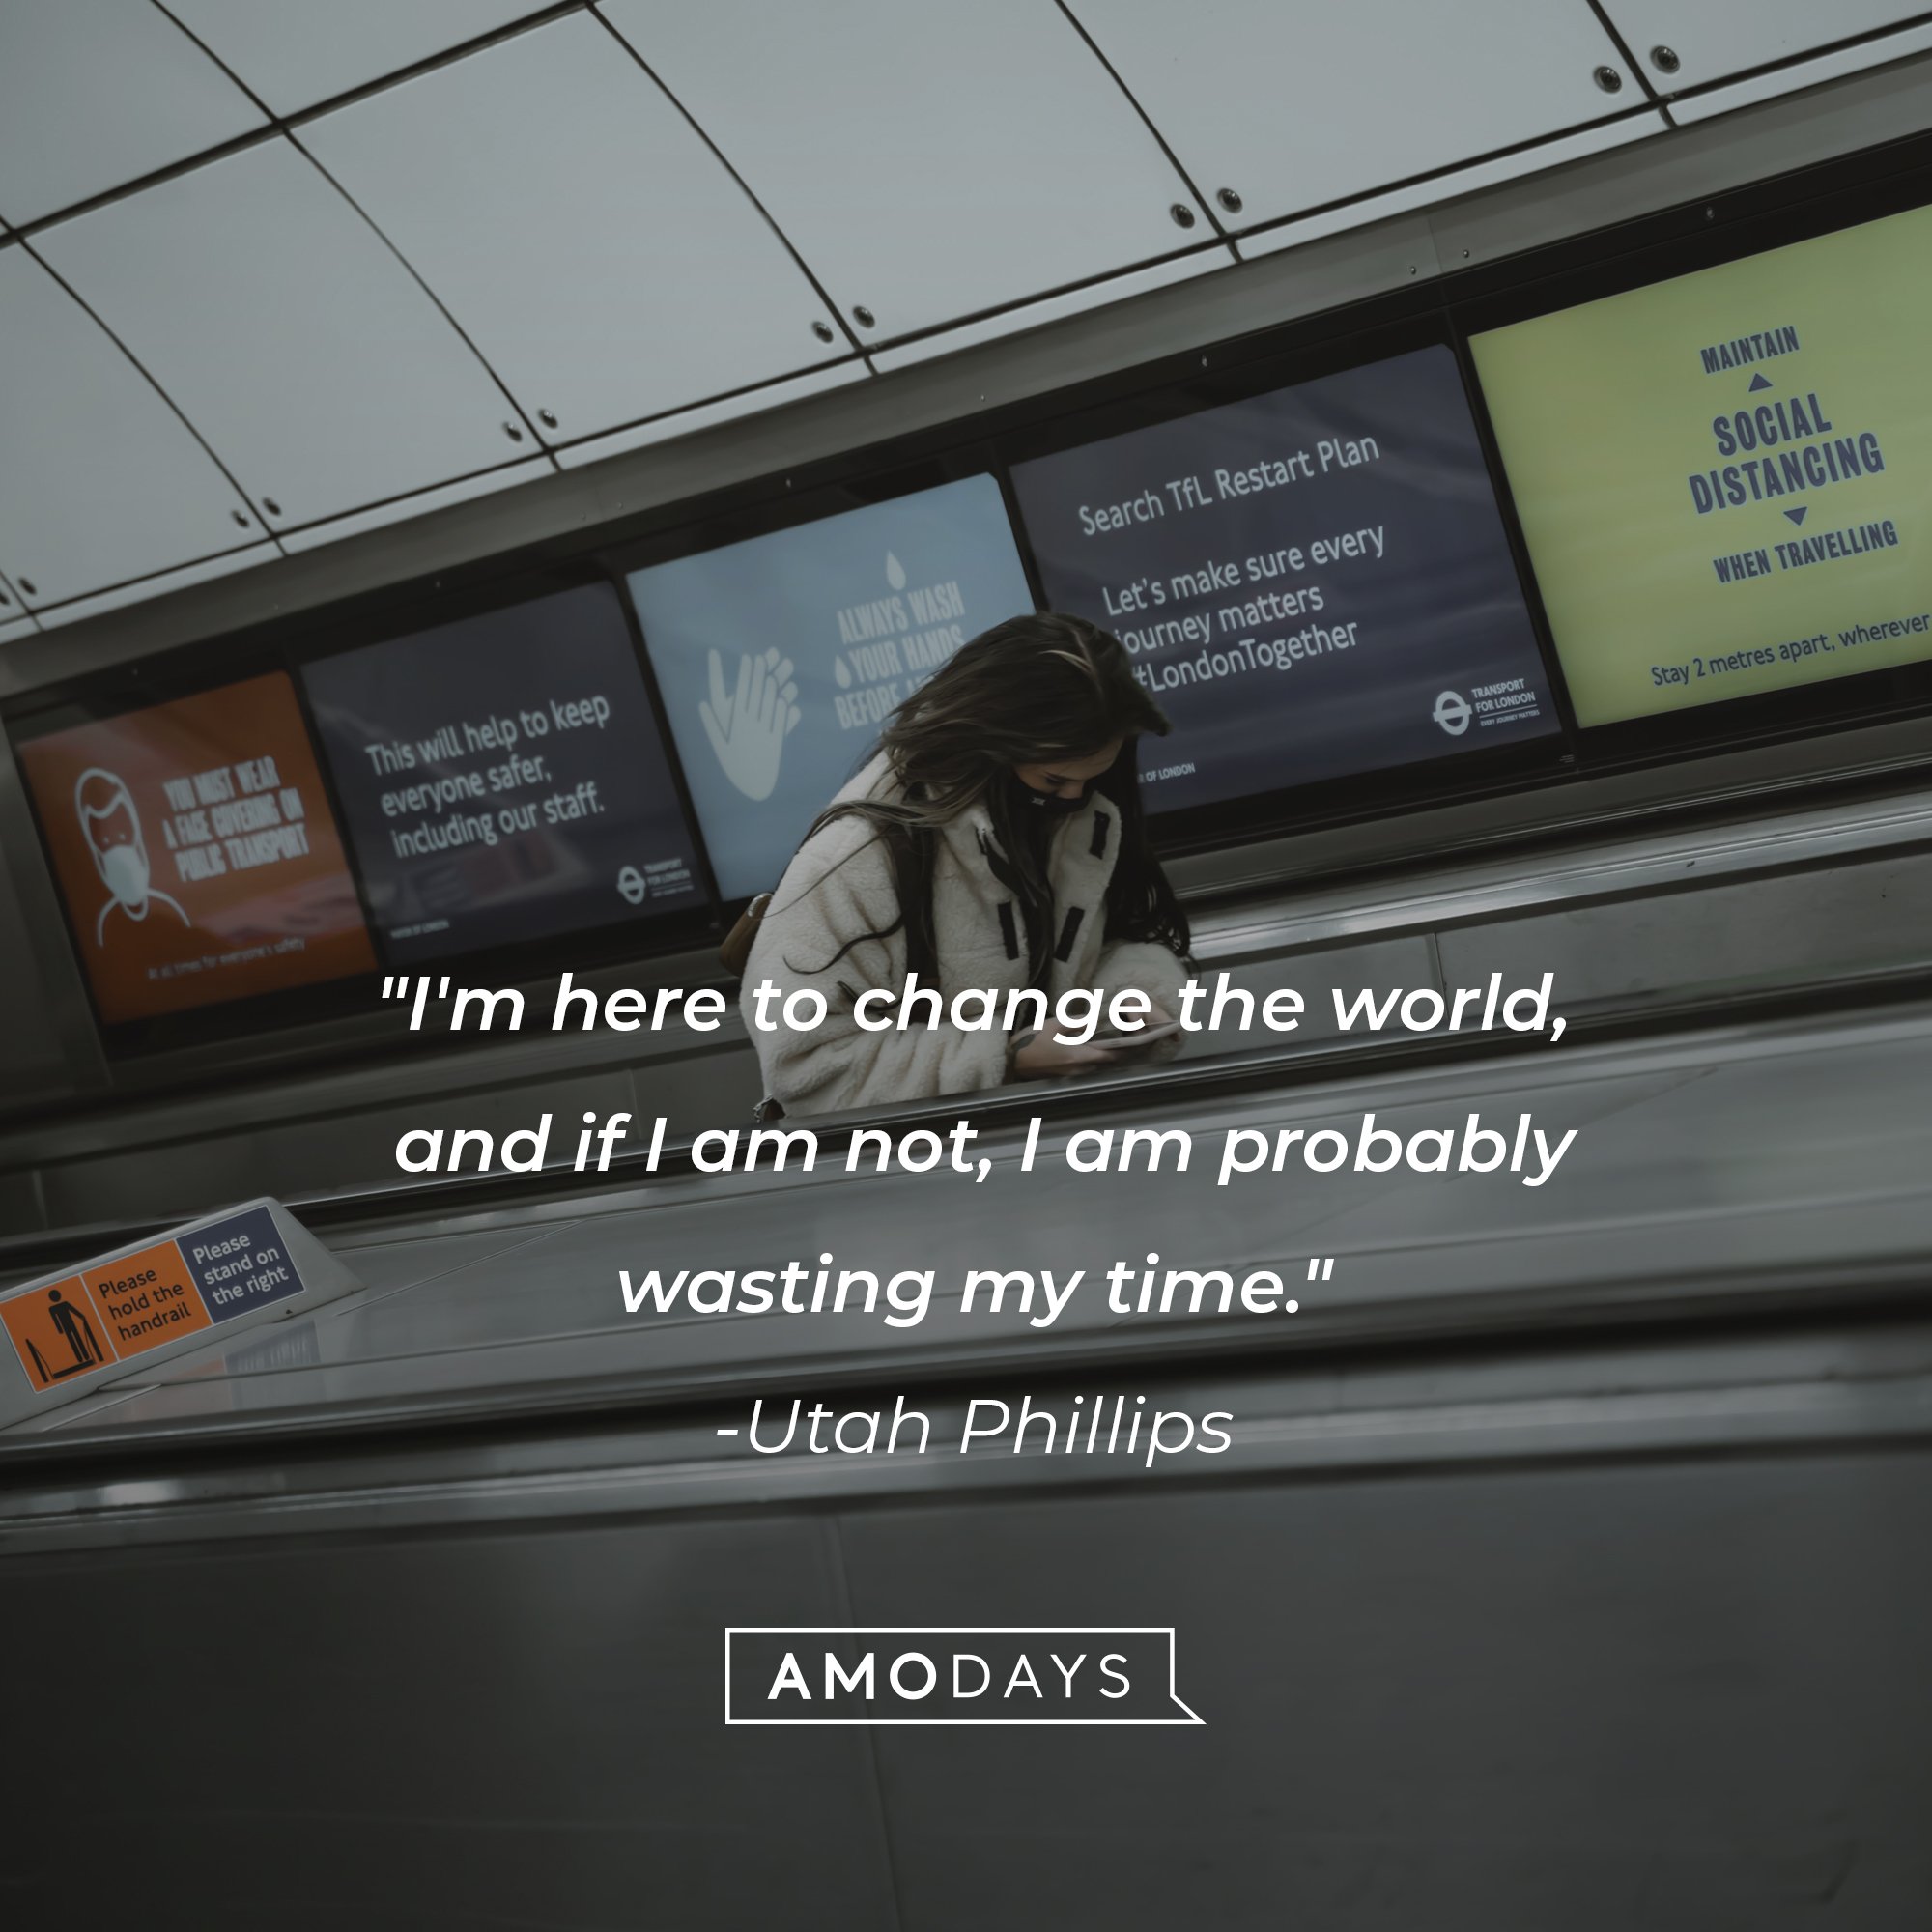 Utah Phillips’ quote: "I'm here to change the world, and if I am not, I am probably wasting my time." | Image: AmoDays 